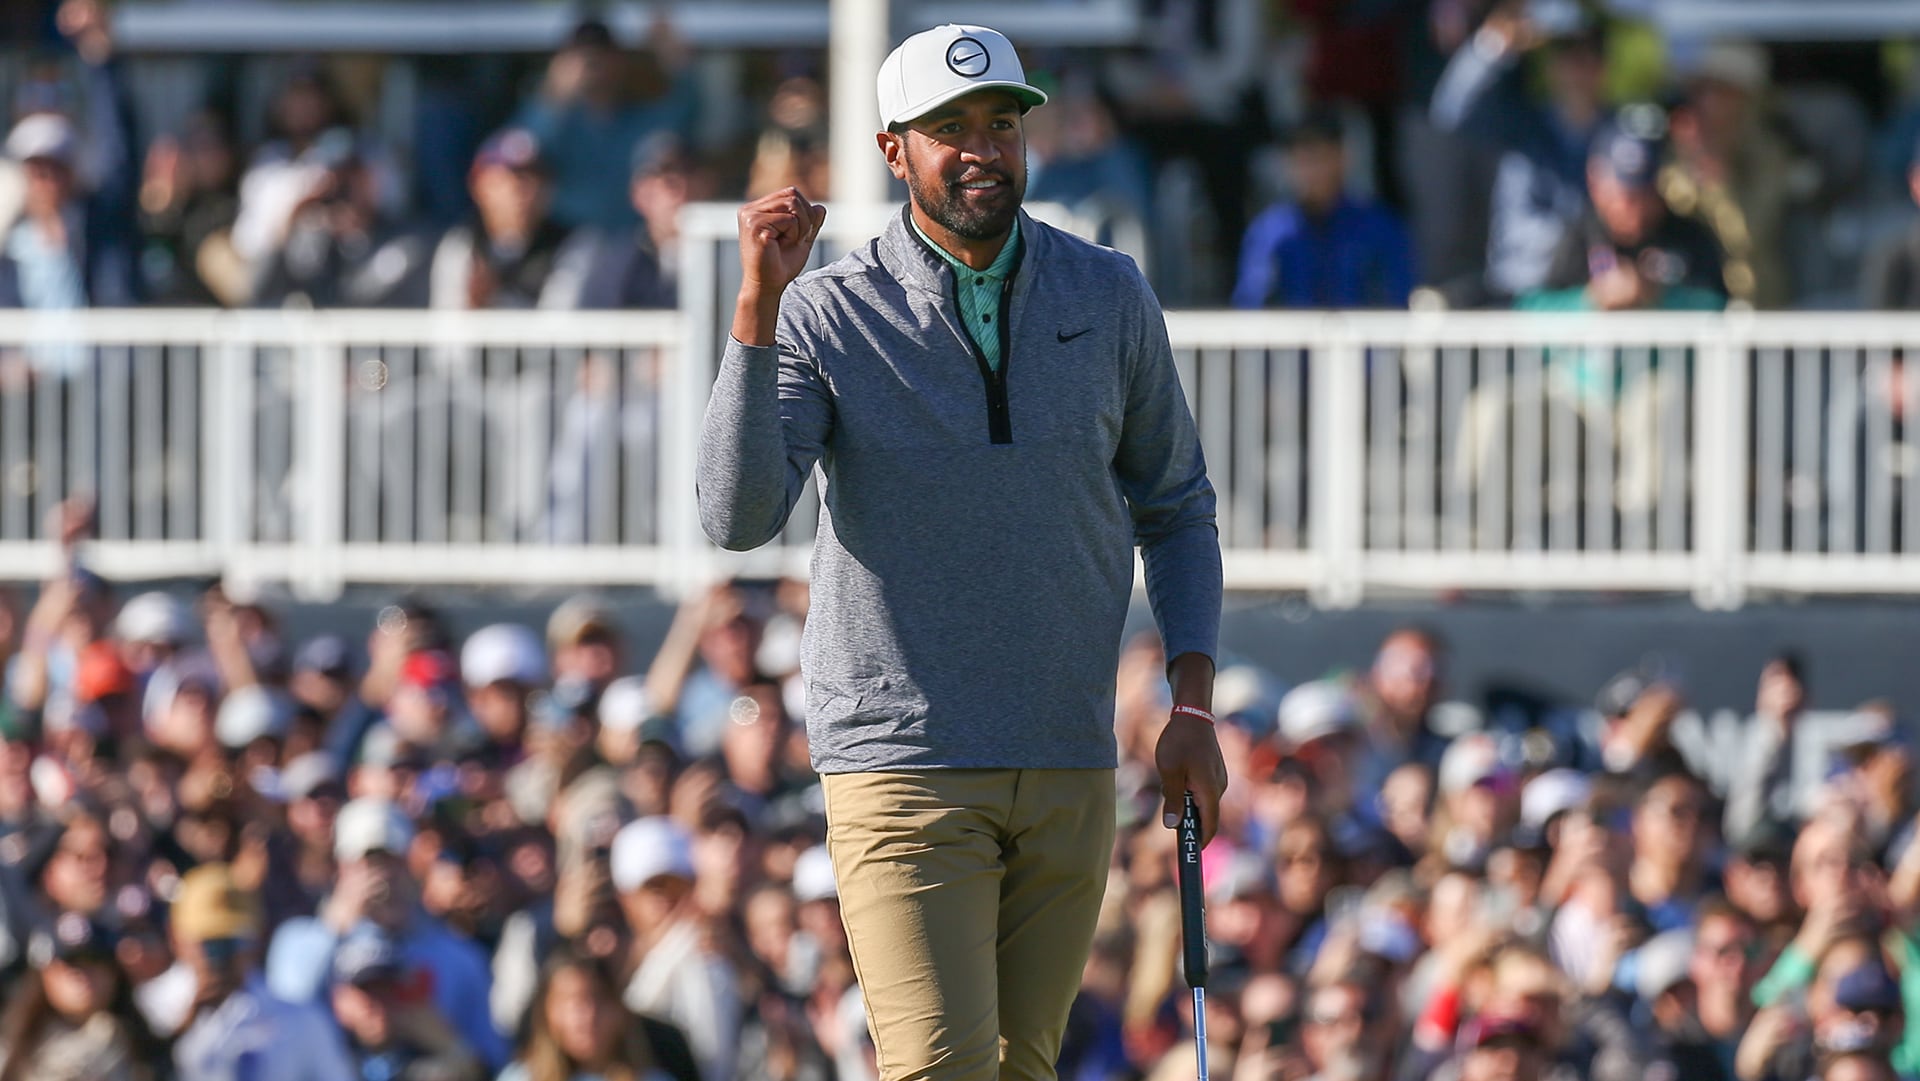 Houston Open payout: Another win, another big payday for Tony Finau